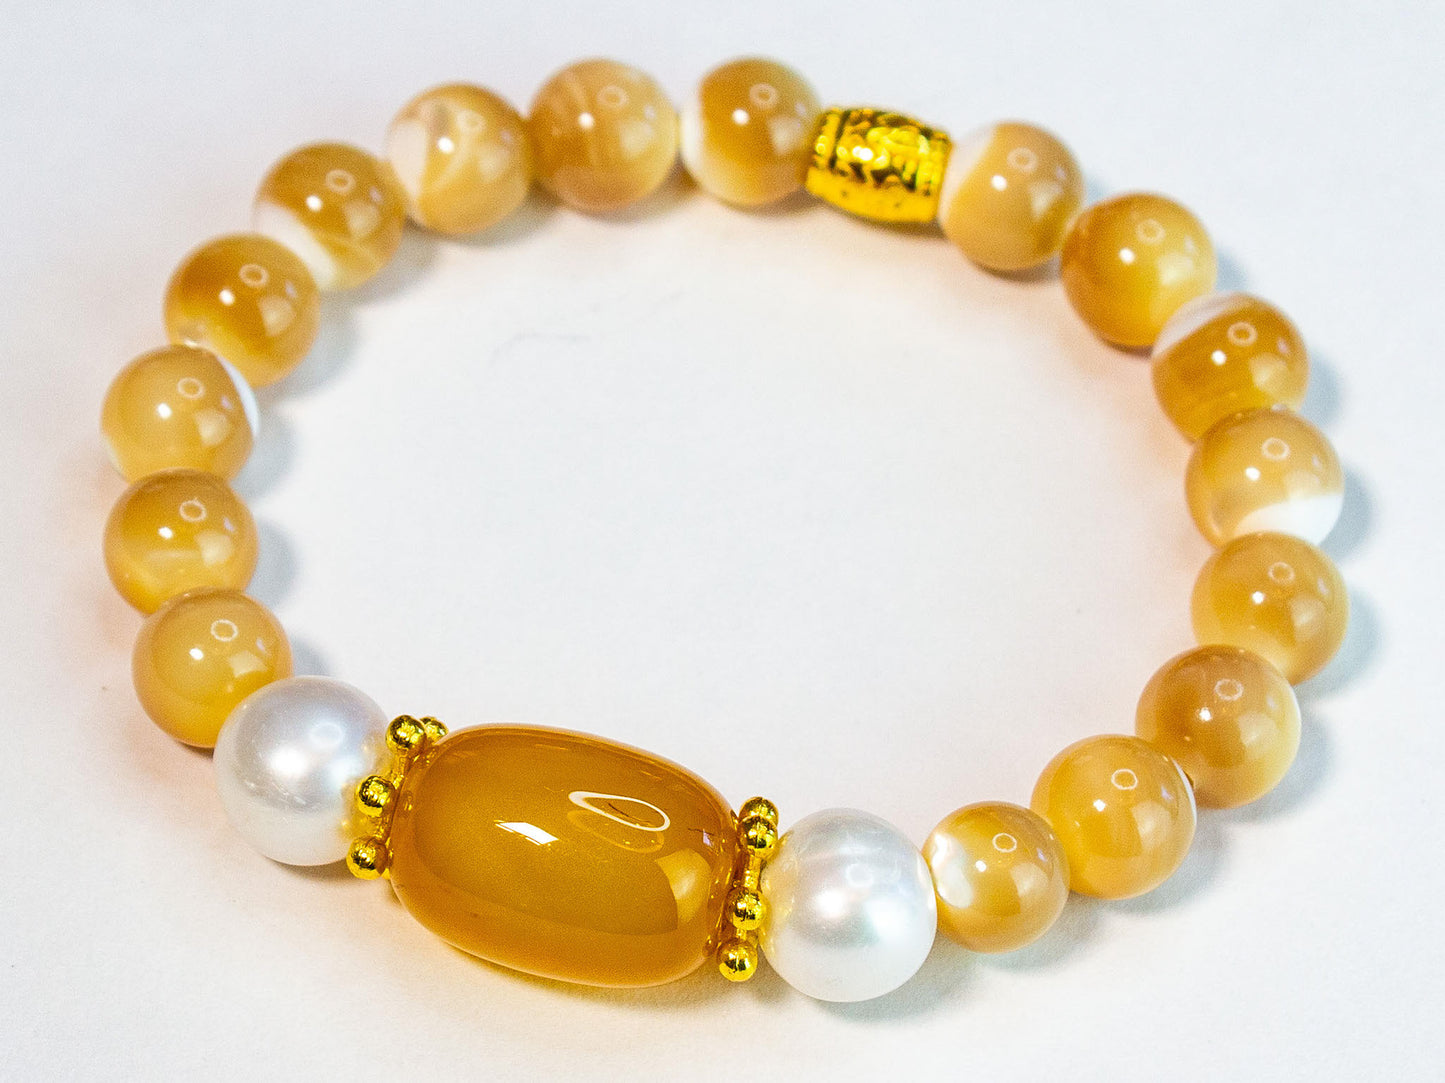 Creamy Mother of Pearl, Pearl and Yellow Onyx Gemstone Necklace and Bracelet Set